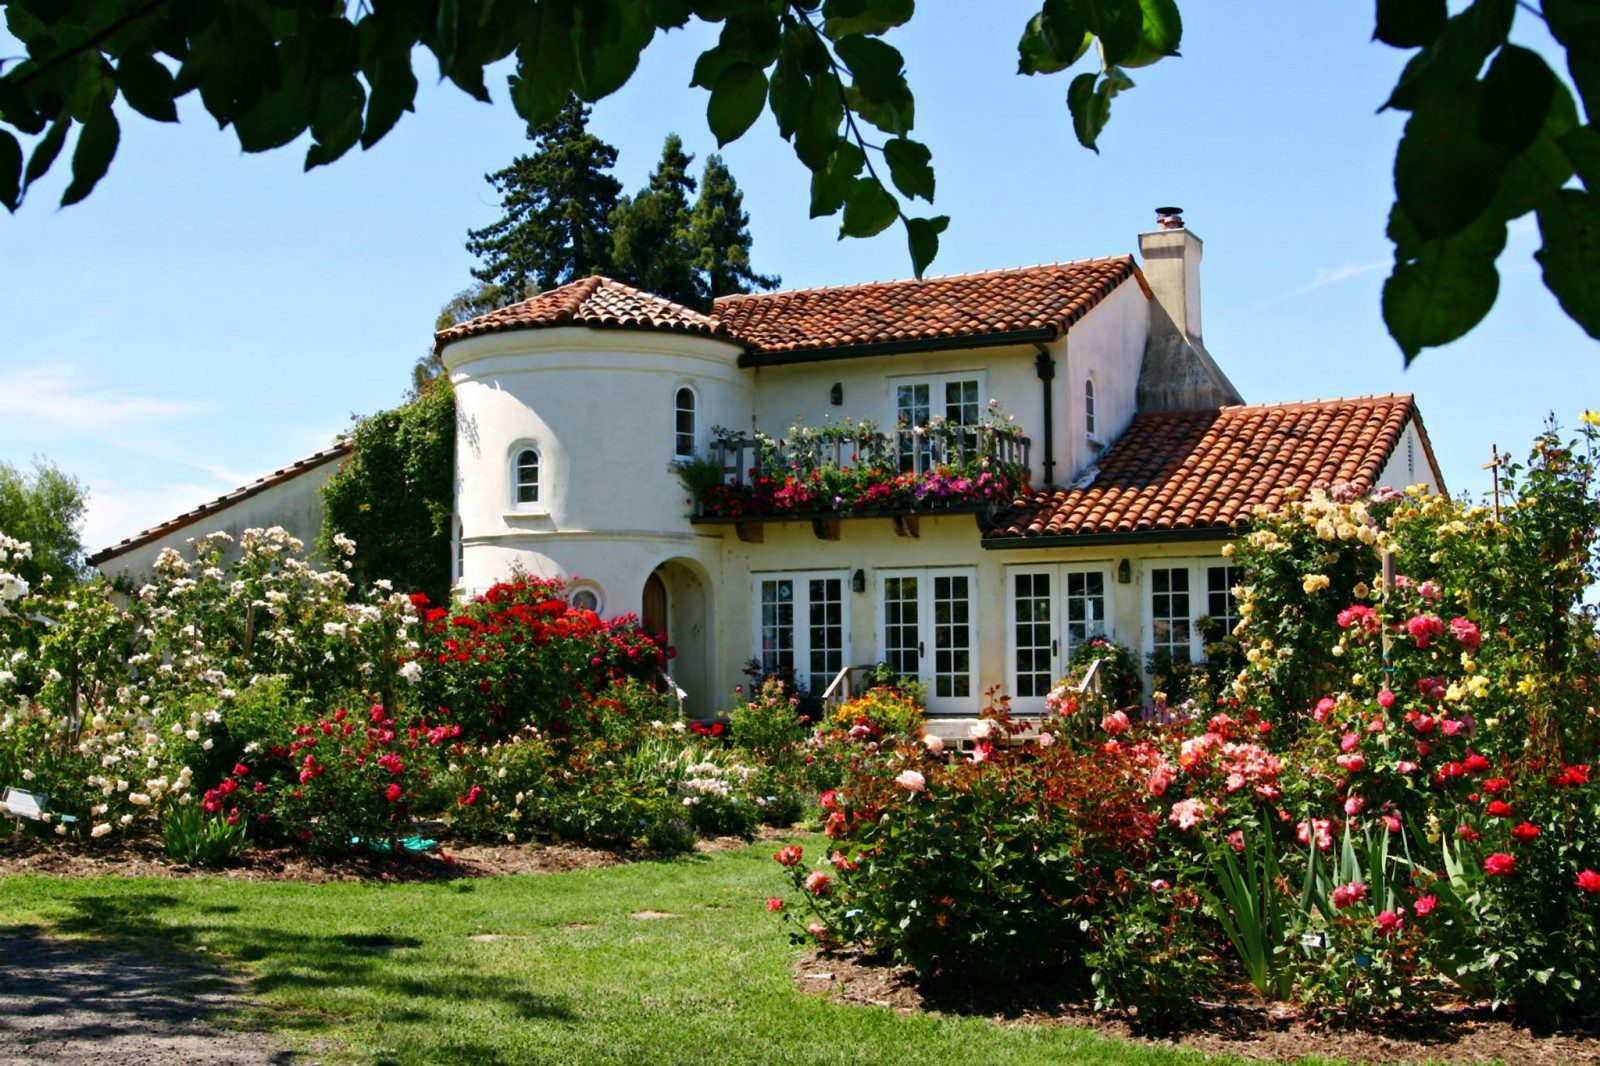 An image a beautiful two story white coloured house with lots of flower bushes around the house